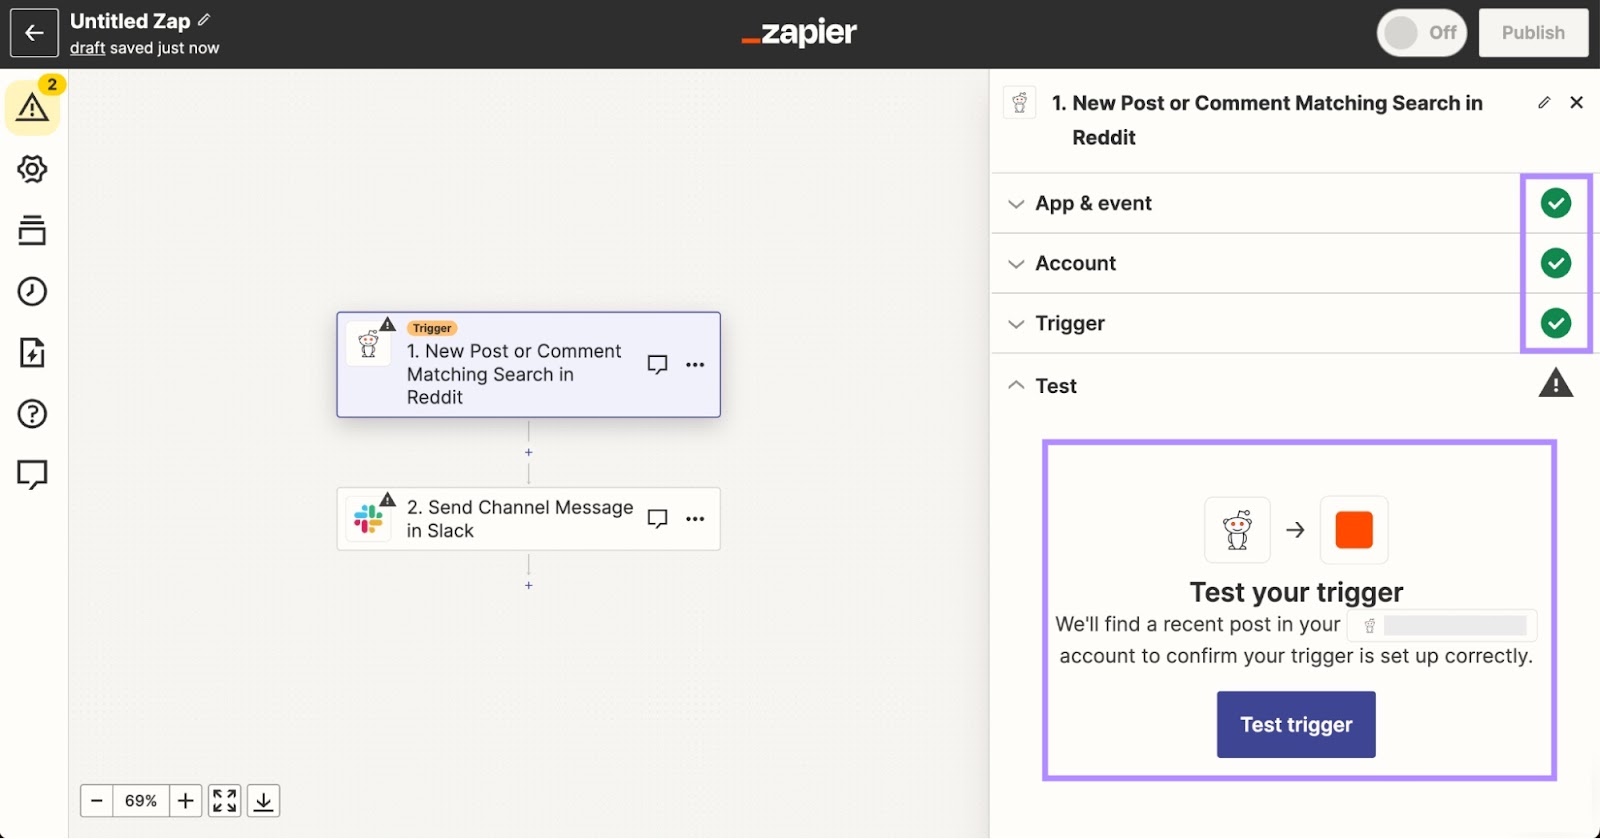 Zapier checks each step of your workflow and prompts you to test the trigger you've set